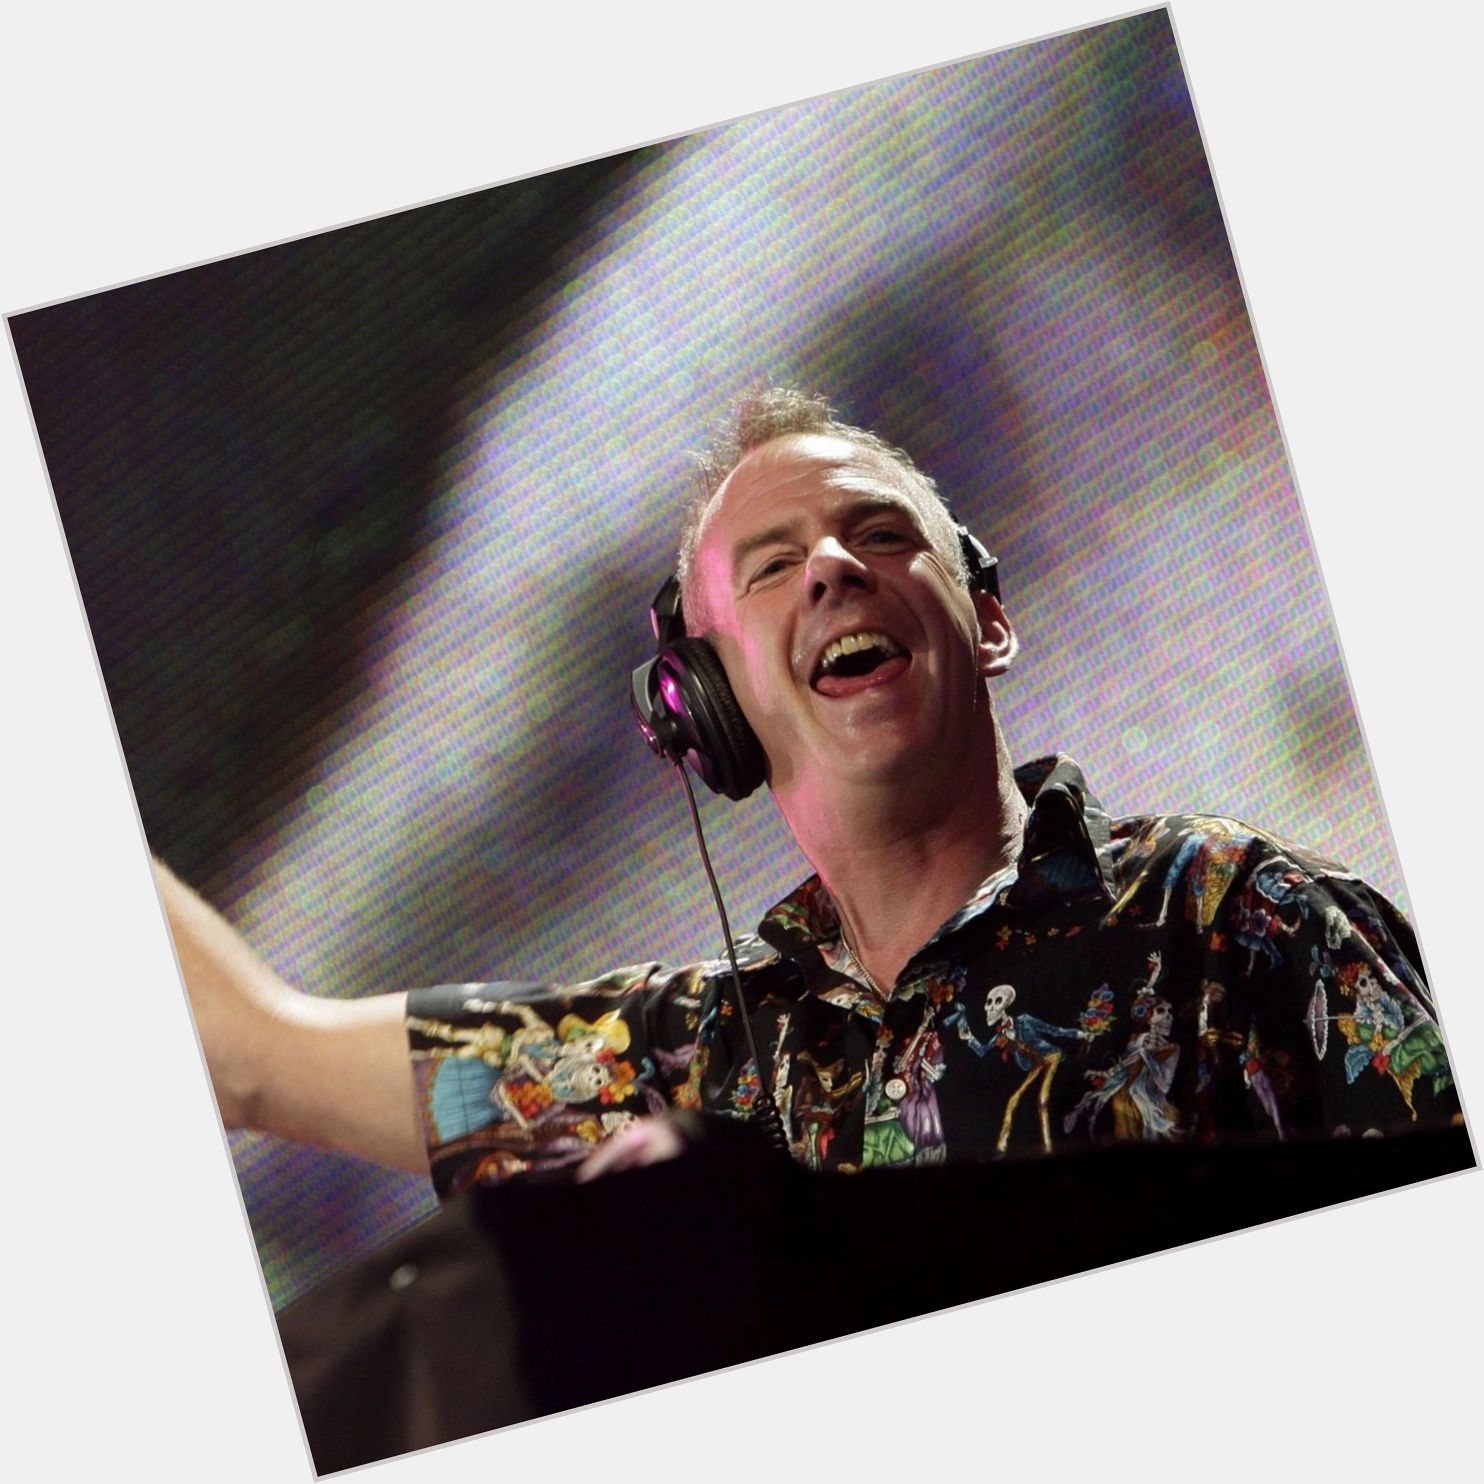 Wishing a happy birthday to Norman Cook, also known as \Fatboy Slim\, who turns 58 today!  